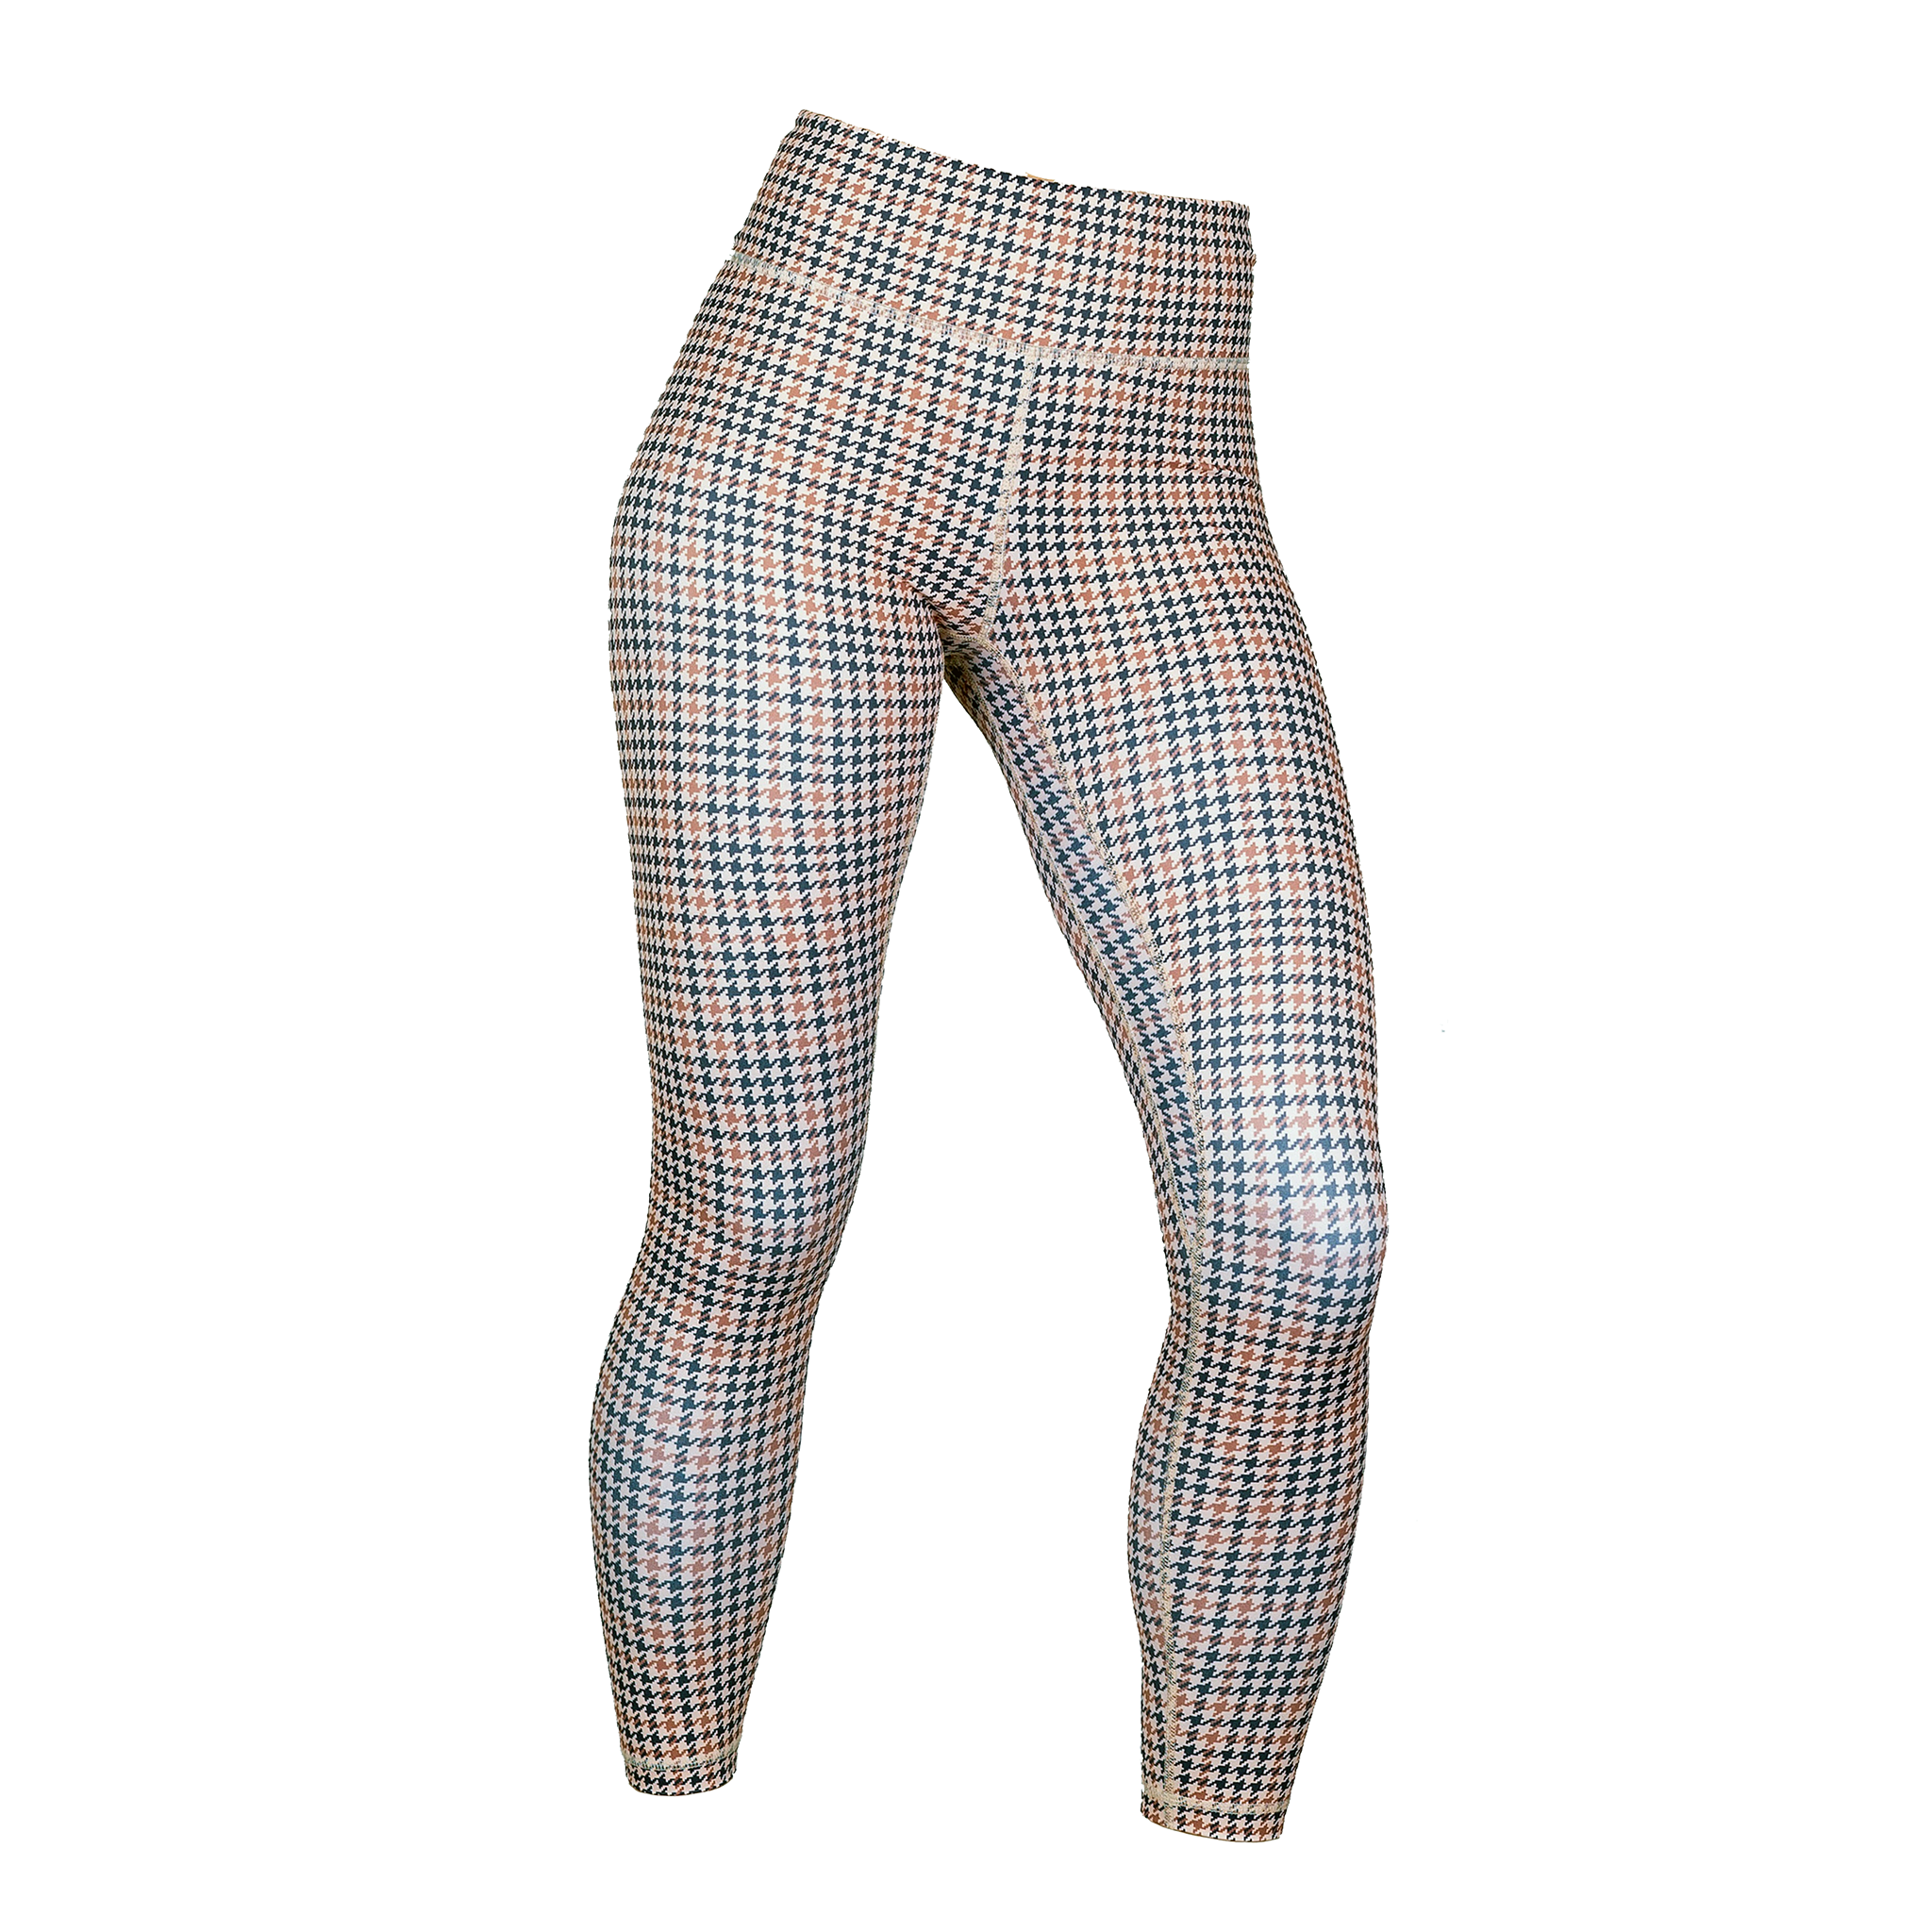 Houndstooth Sports Leggings for Women Printed Hounds Tooth Pattern